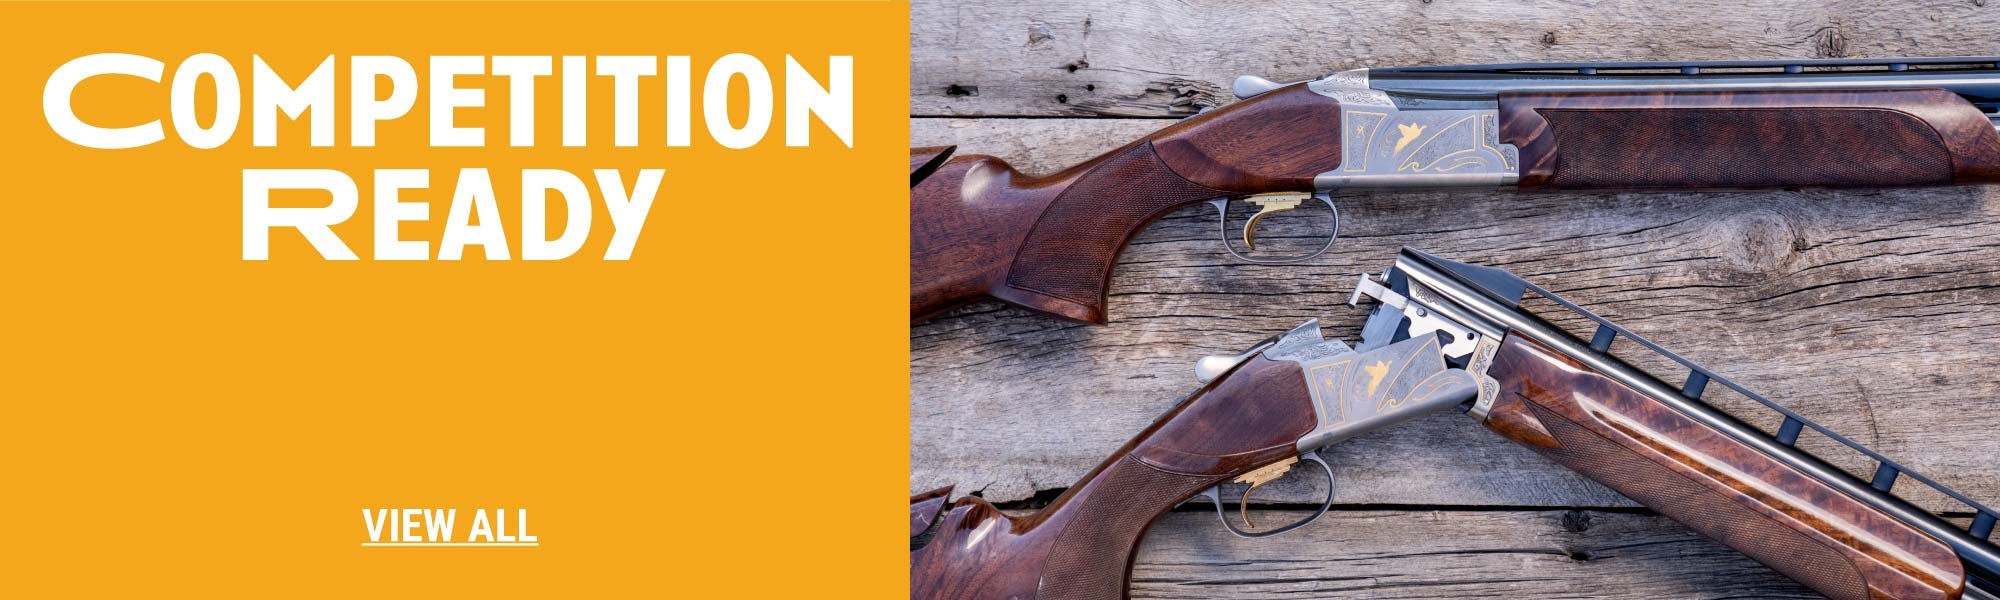 Ready-for-competition-sporting-clays-shotguns_Citori-Over-under_MOBILE